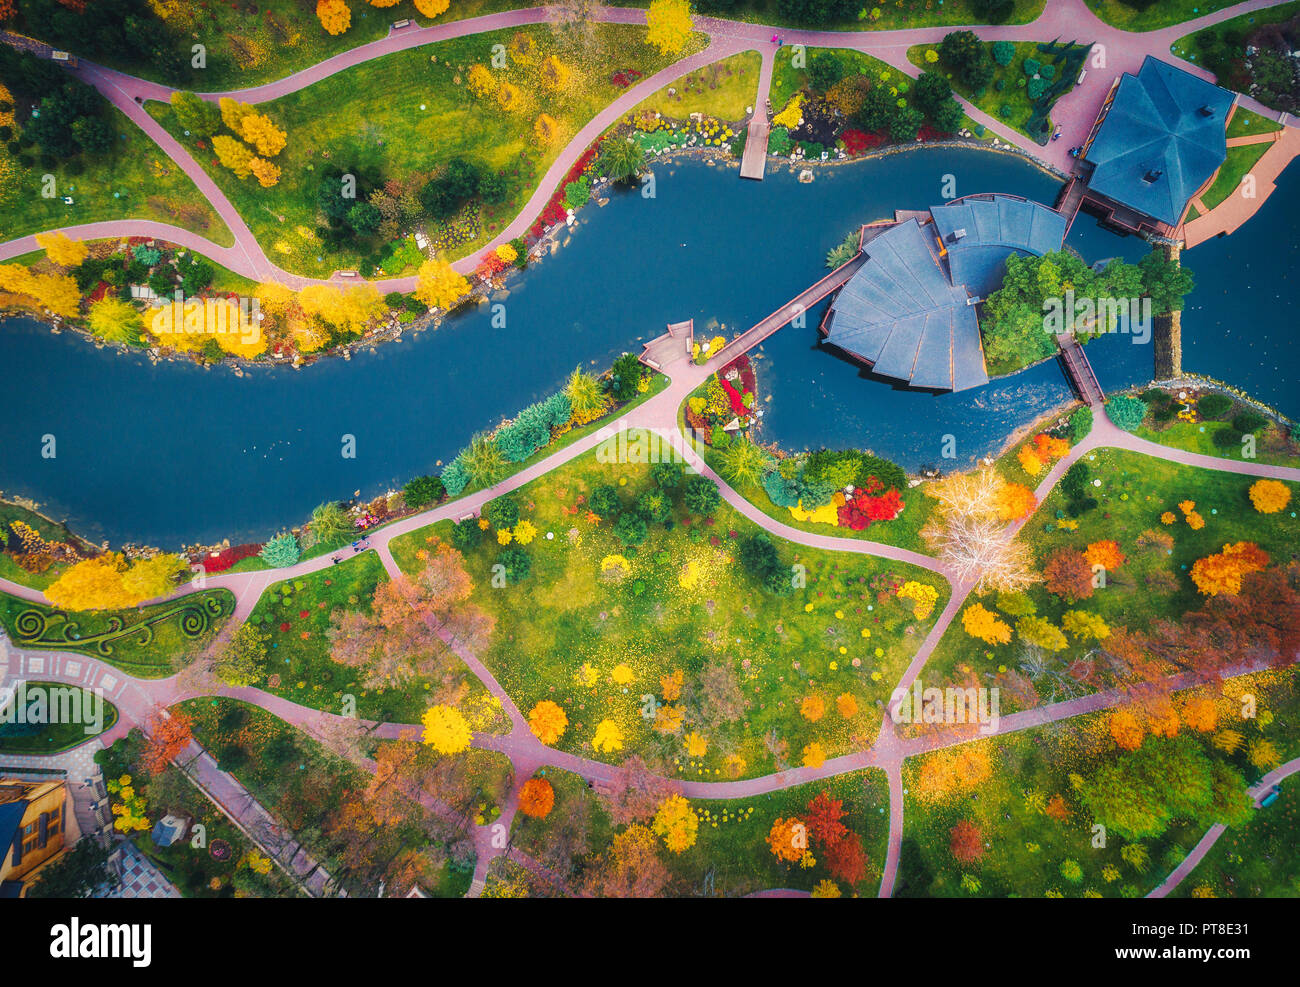 Aerial view of amazing autumn park with pond in europe at sunset. Landscape with trees with colorful leaves, buildings, field with green grass and pat Stock Photo